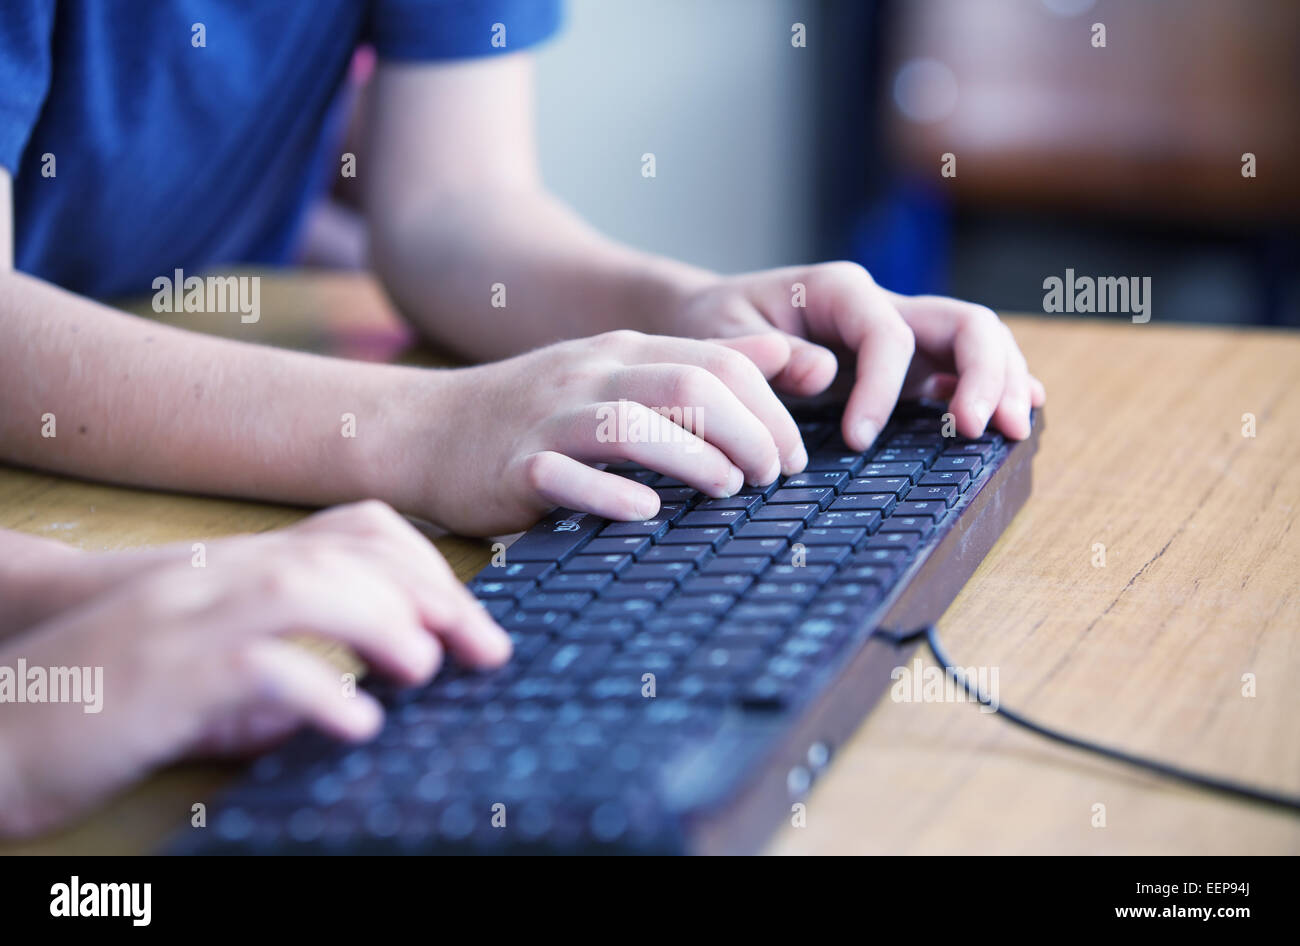 Students typing on computer keyboard at school. Stock Photo